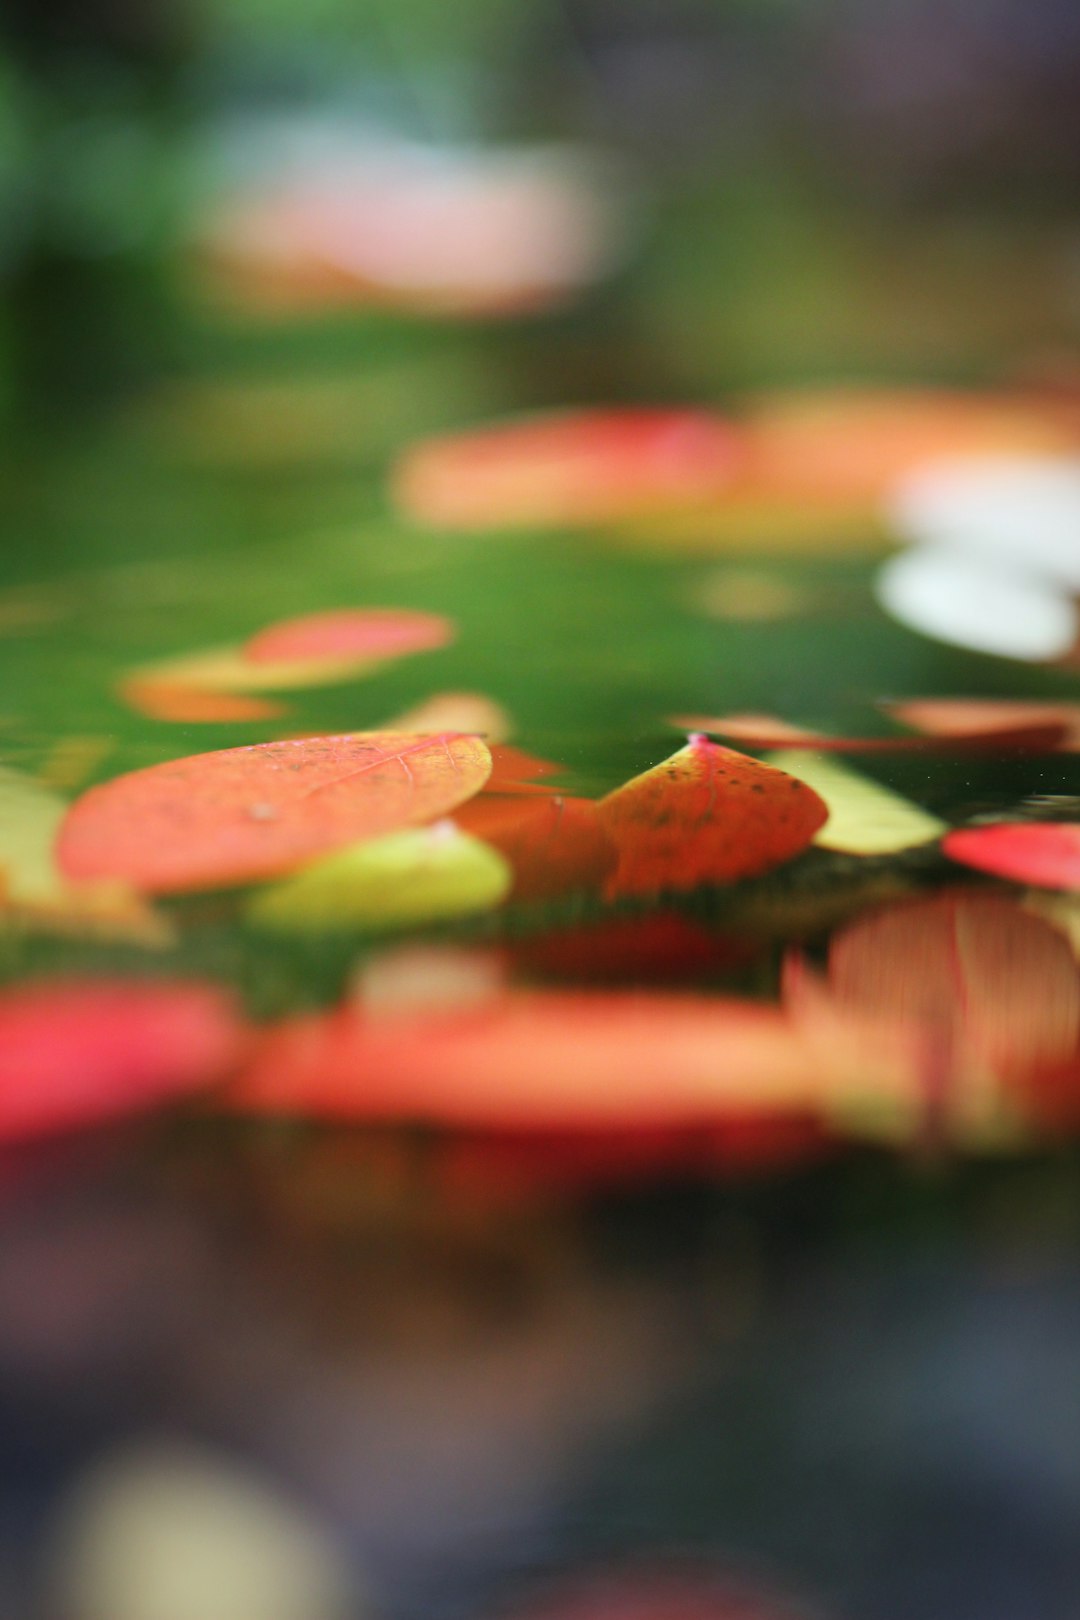 shallow focus photography of orange and yellow leaves